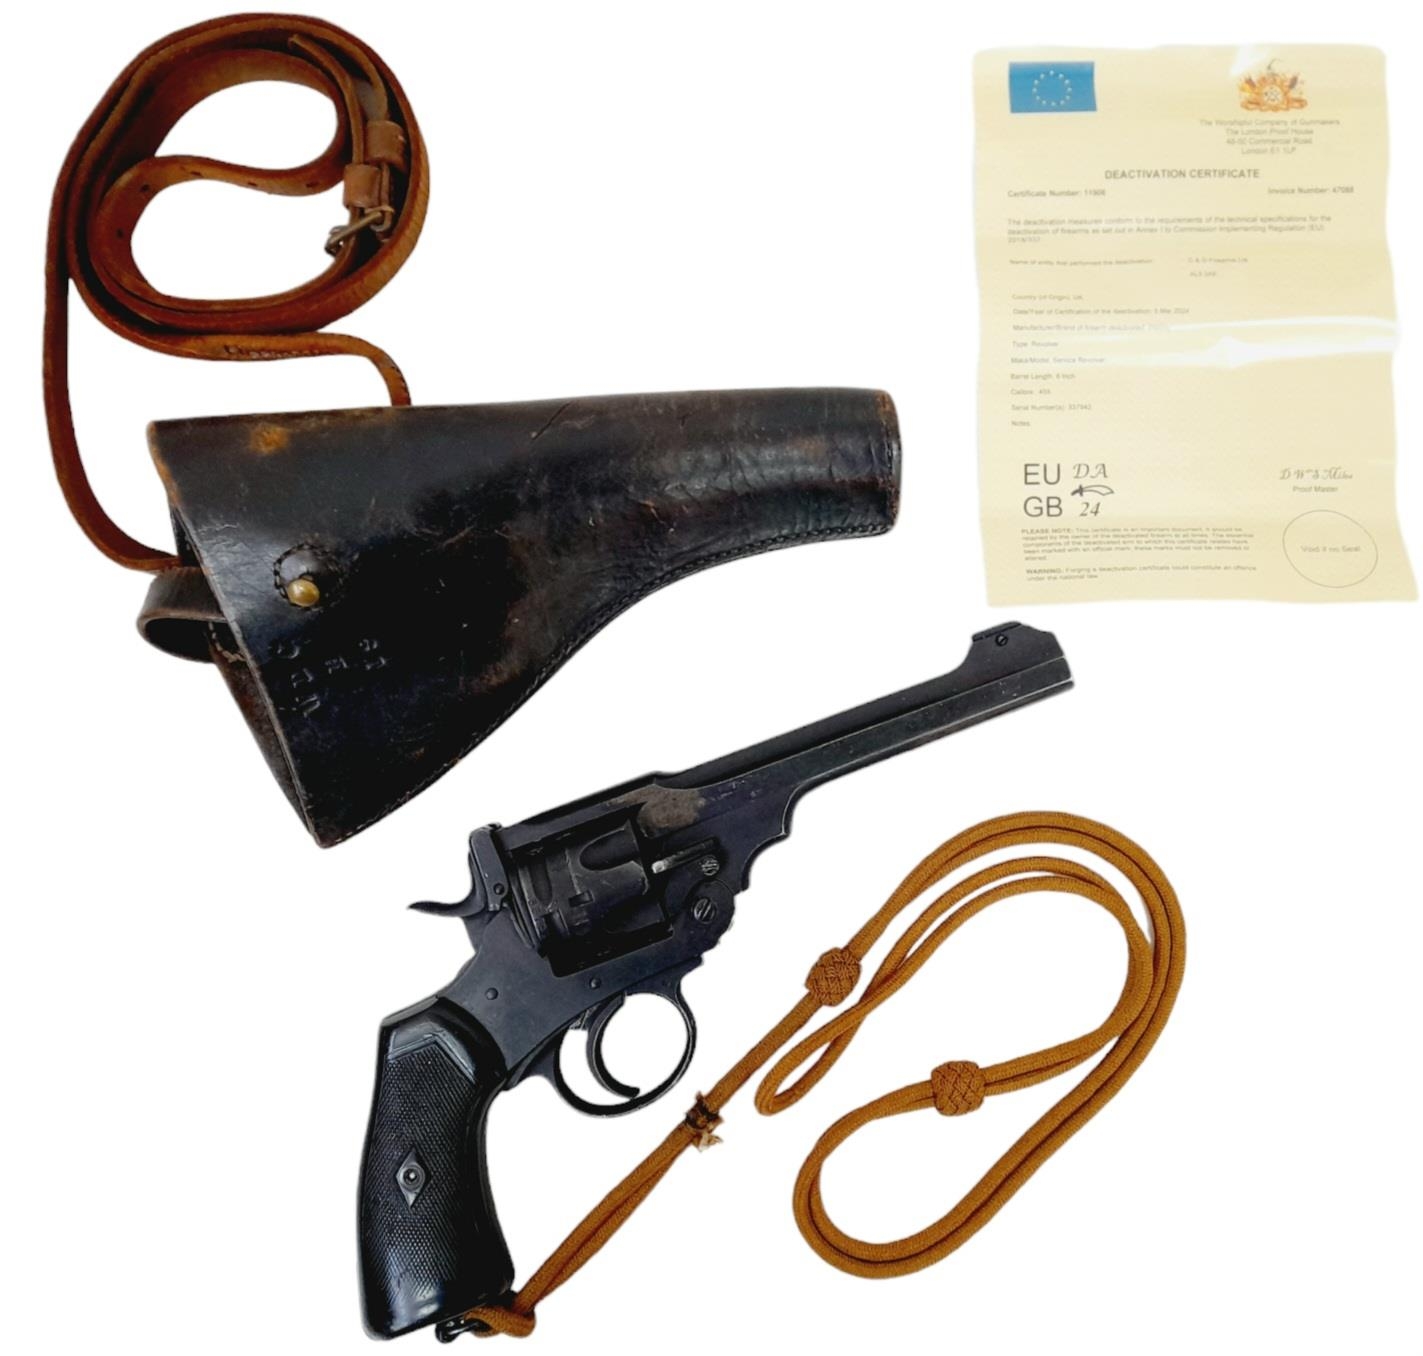 A Deactivated Webley Mark IV Revolver with Leather Holster. The British army adopted the mark IV